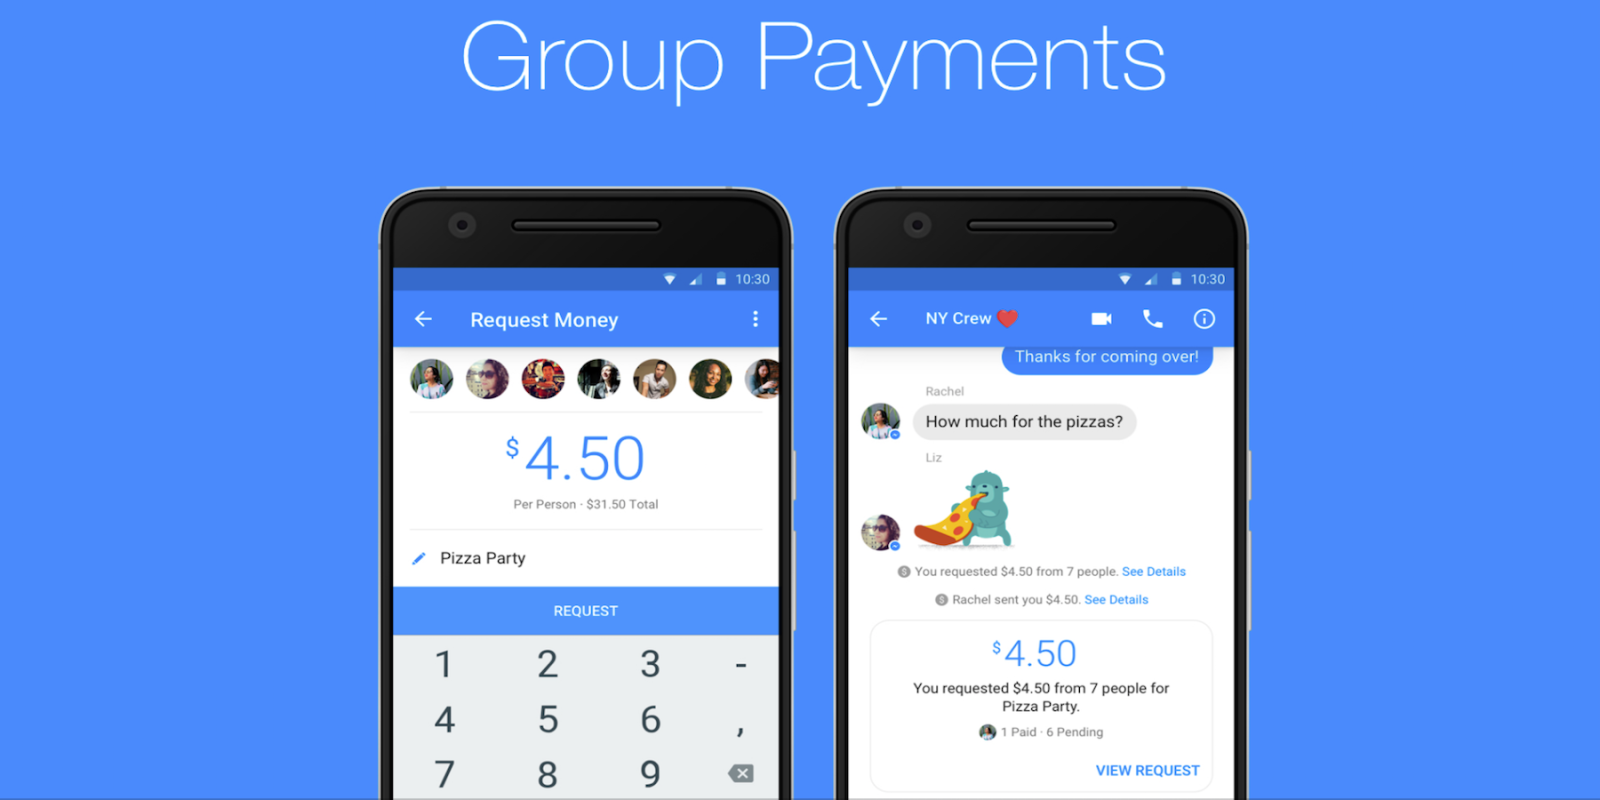 Facebook Messenger is starting to test out a new “Split Payments” feature